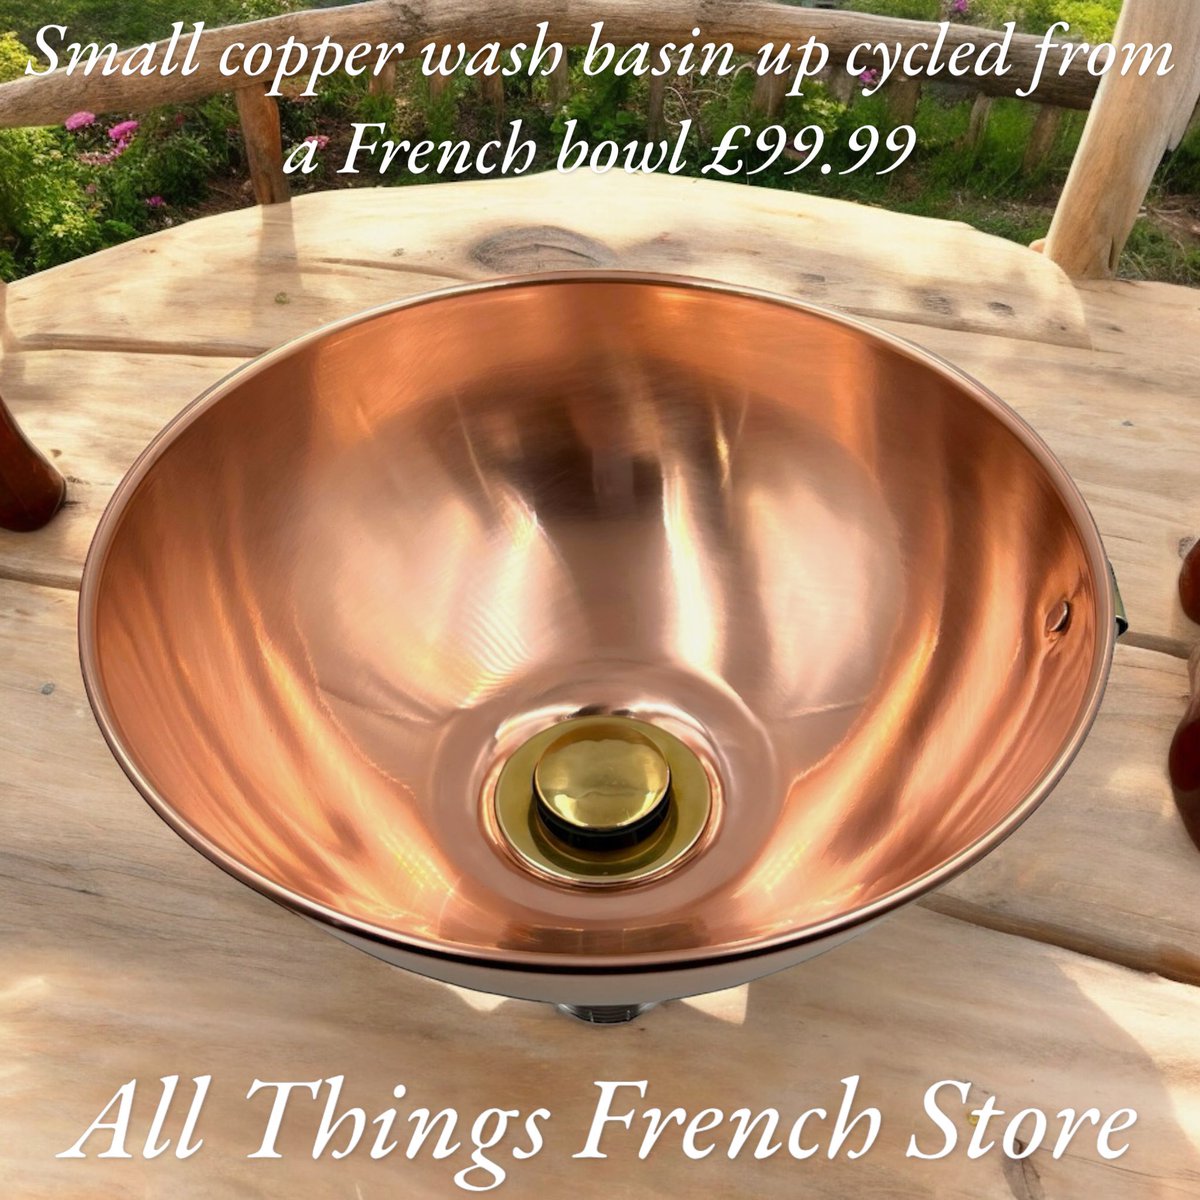 allthingsfrenchstore.com/products/coppe… #camperconversion #coppersink #smallbusiness